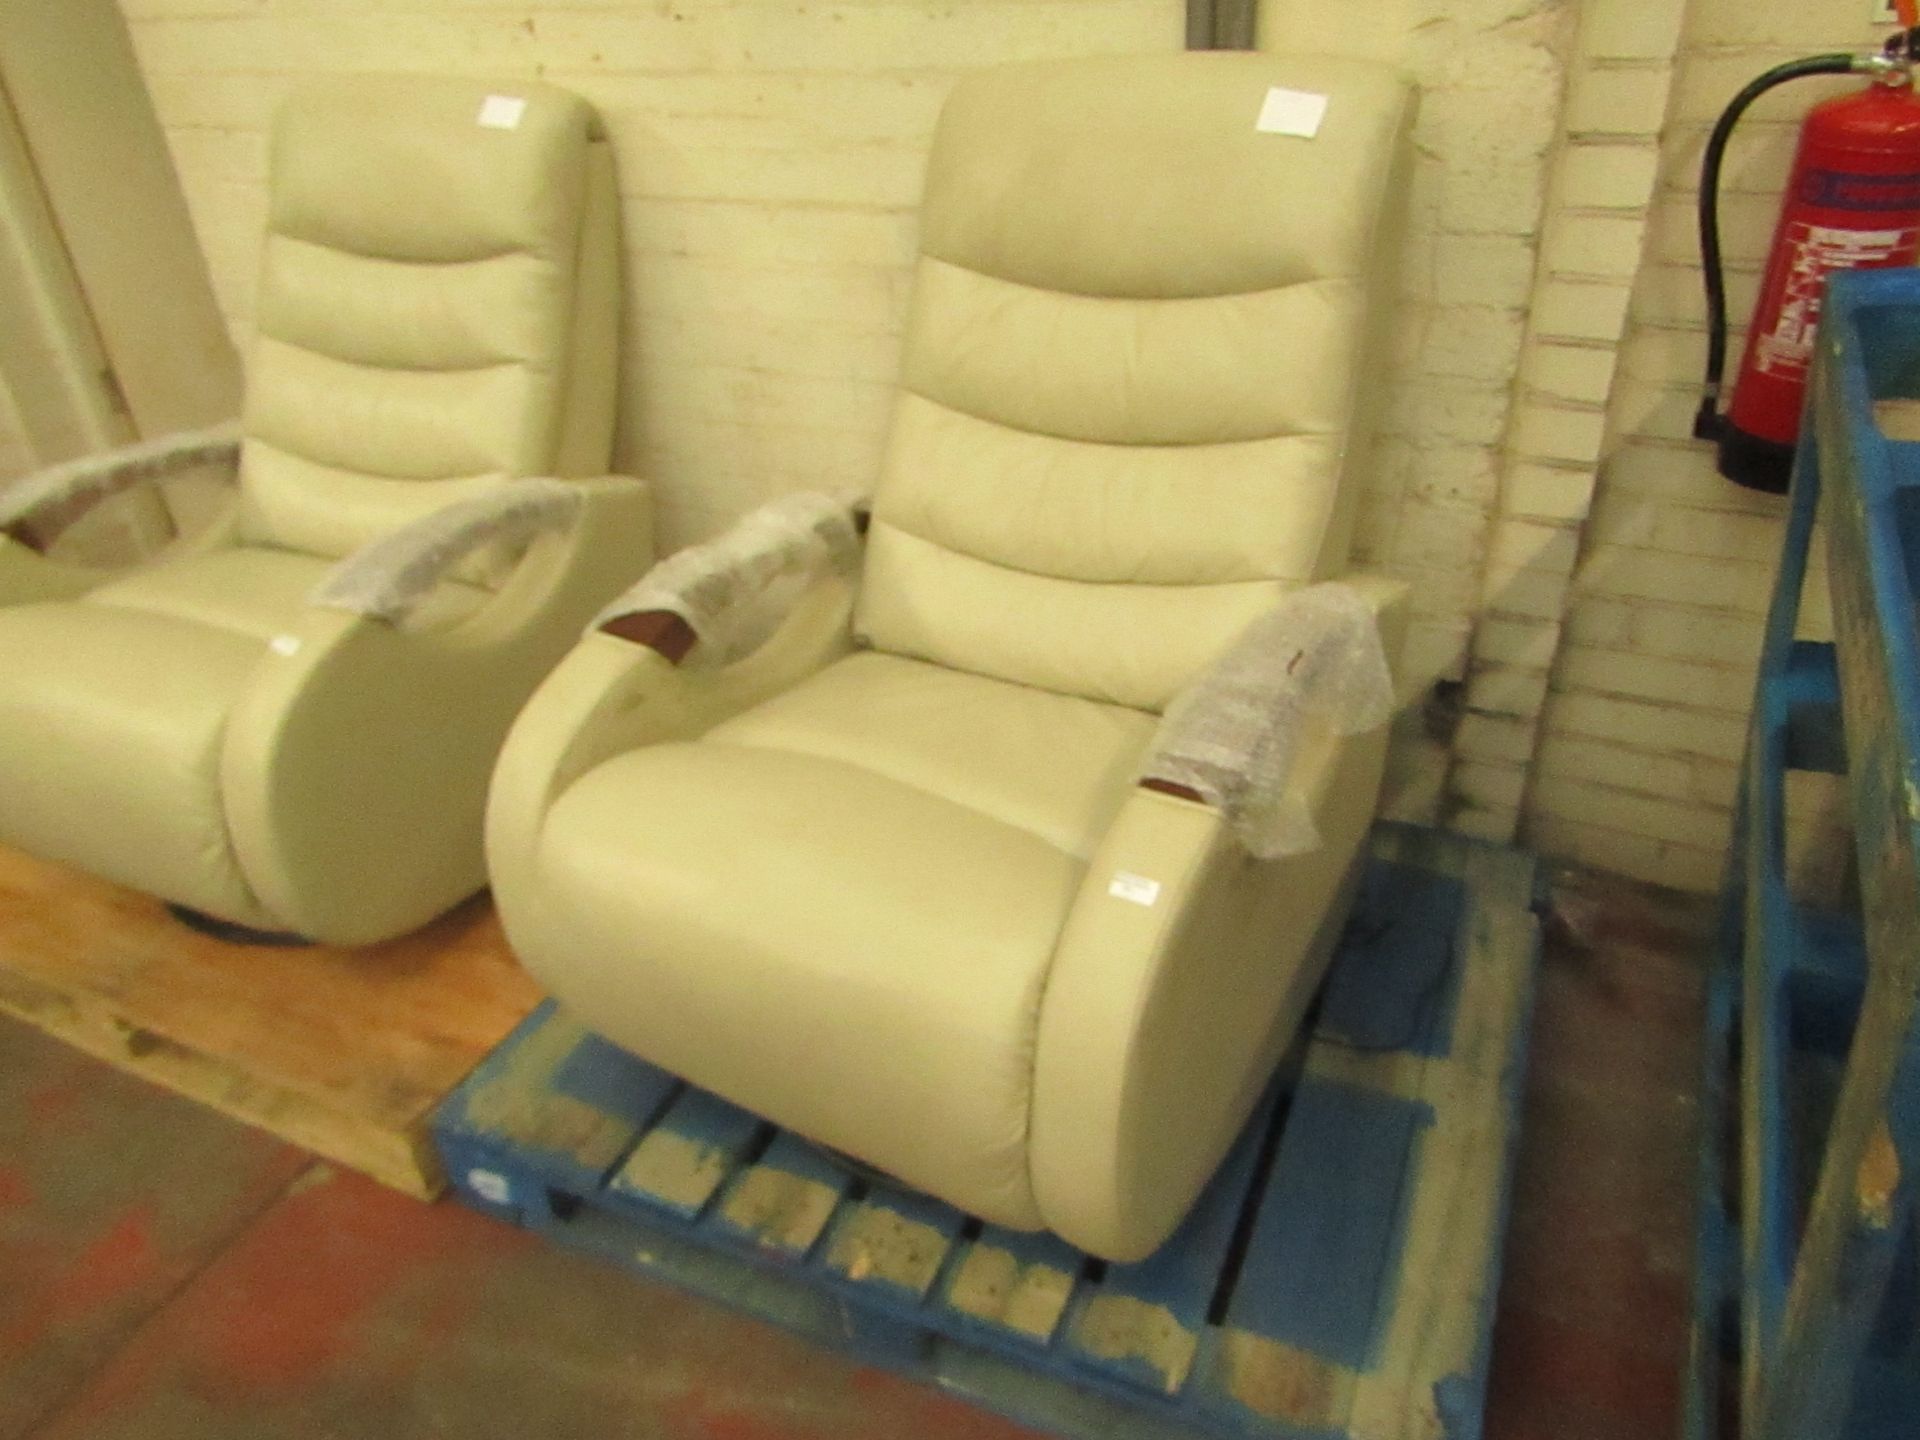 | 1X | COSTCO WHITE LEATHER RECLINER CHAIR | ITEM IS TESTED & WORKING |